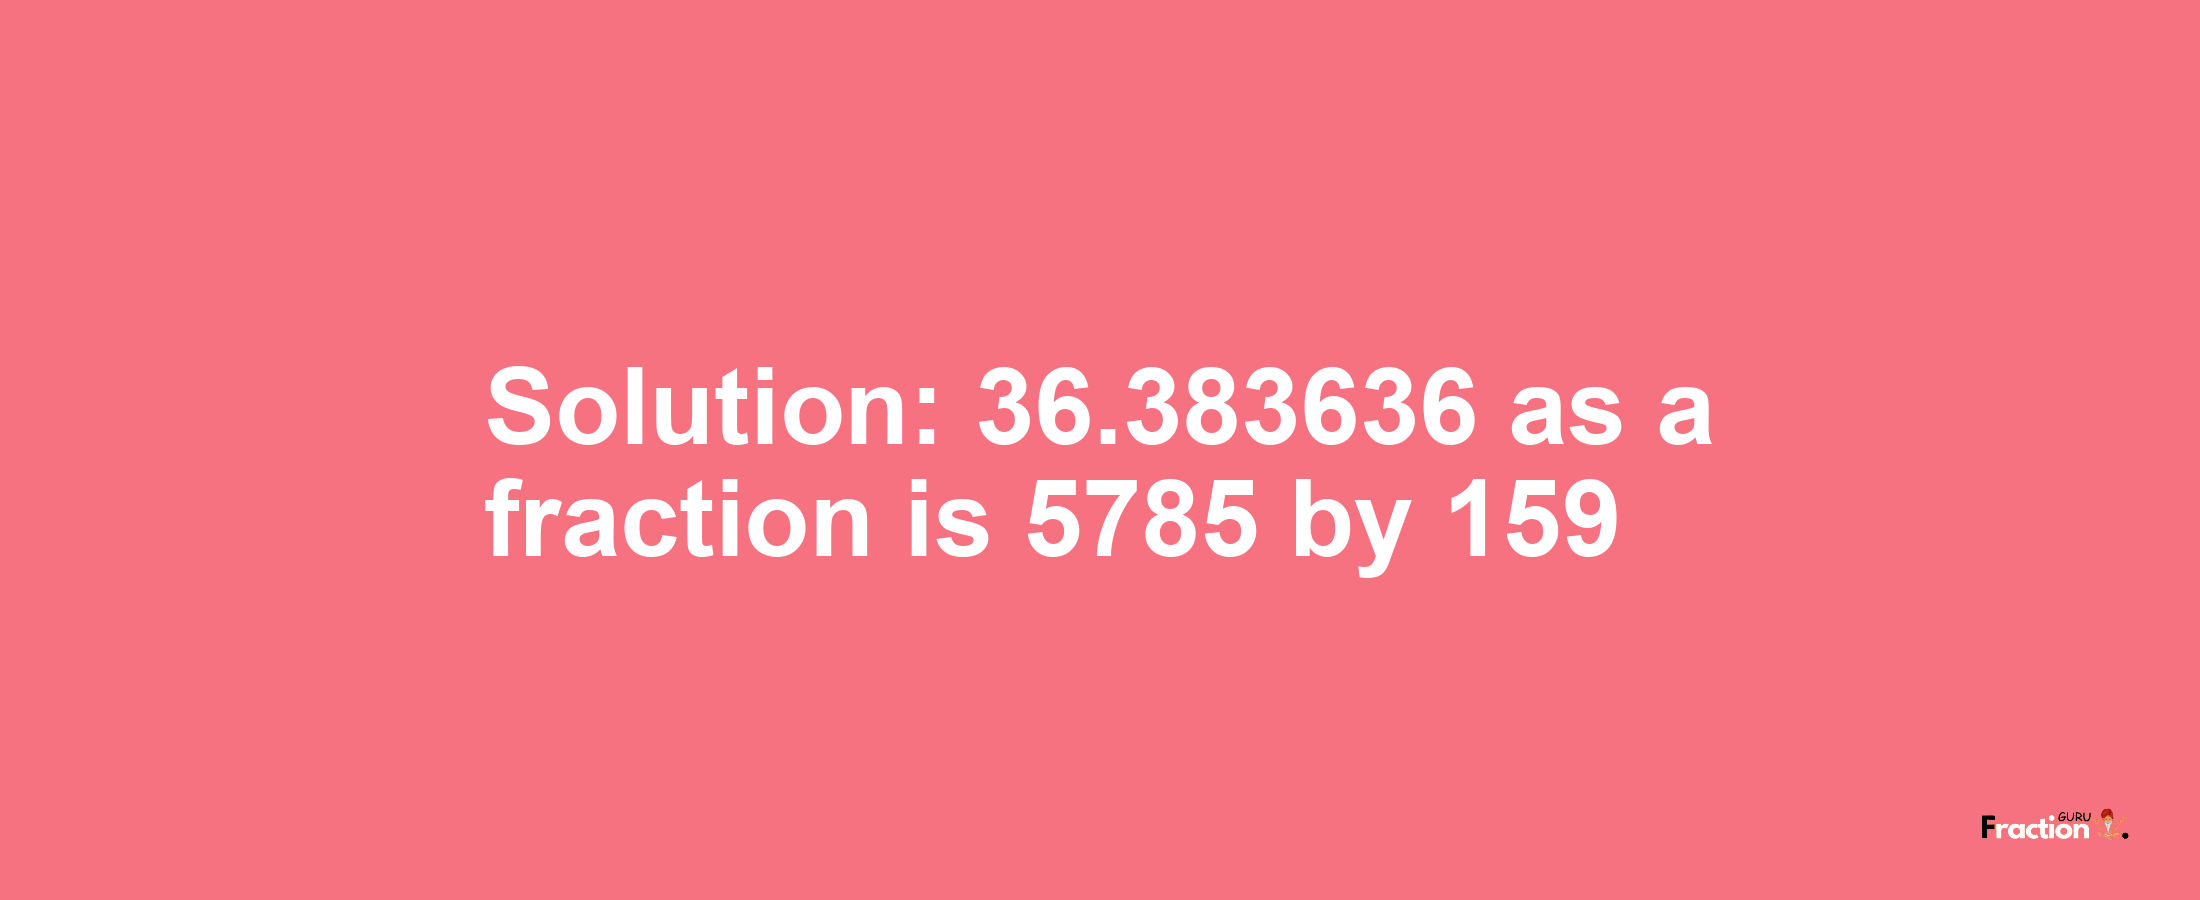 Solution:36.383636 as a fraction is 5785/159